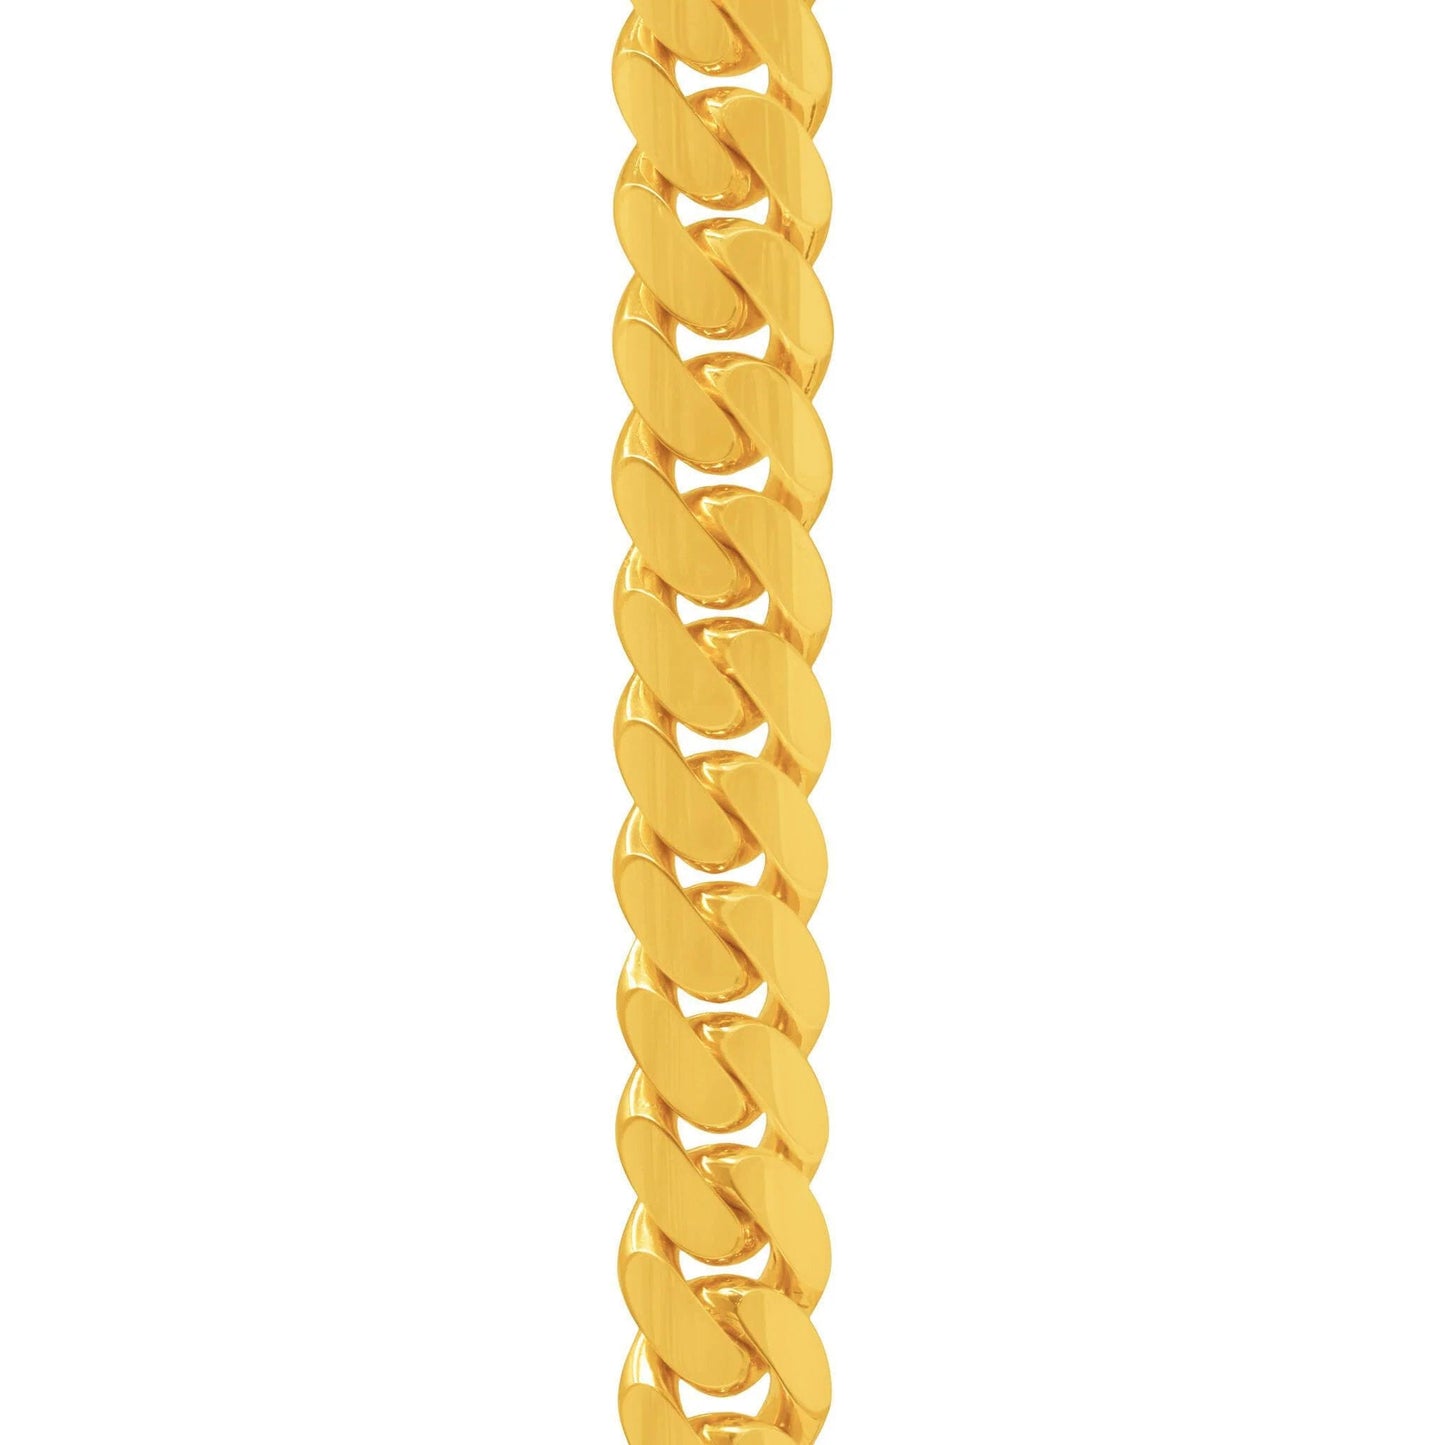 13mm Miami Cuban Link Bracelet in 14K Solid Yellow Gold - Vera Jewelry in Miami